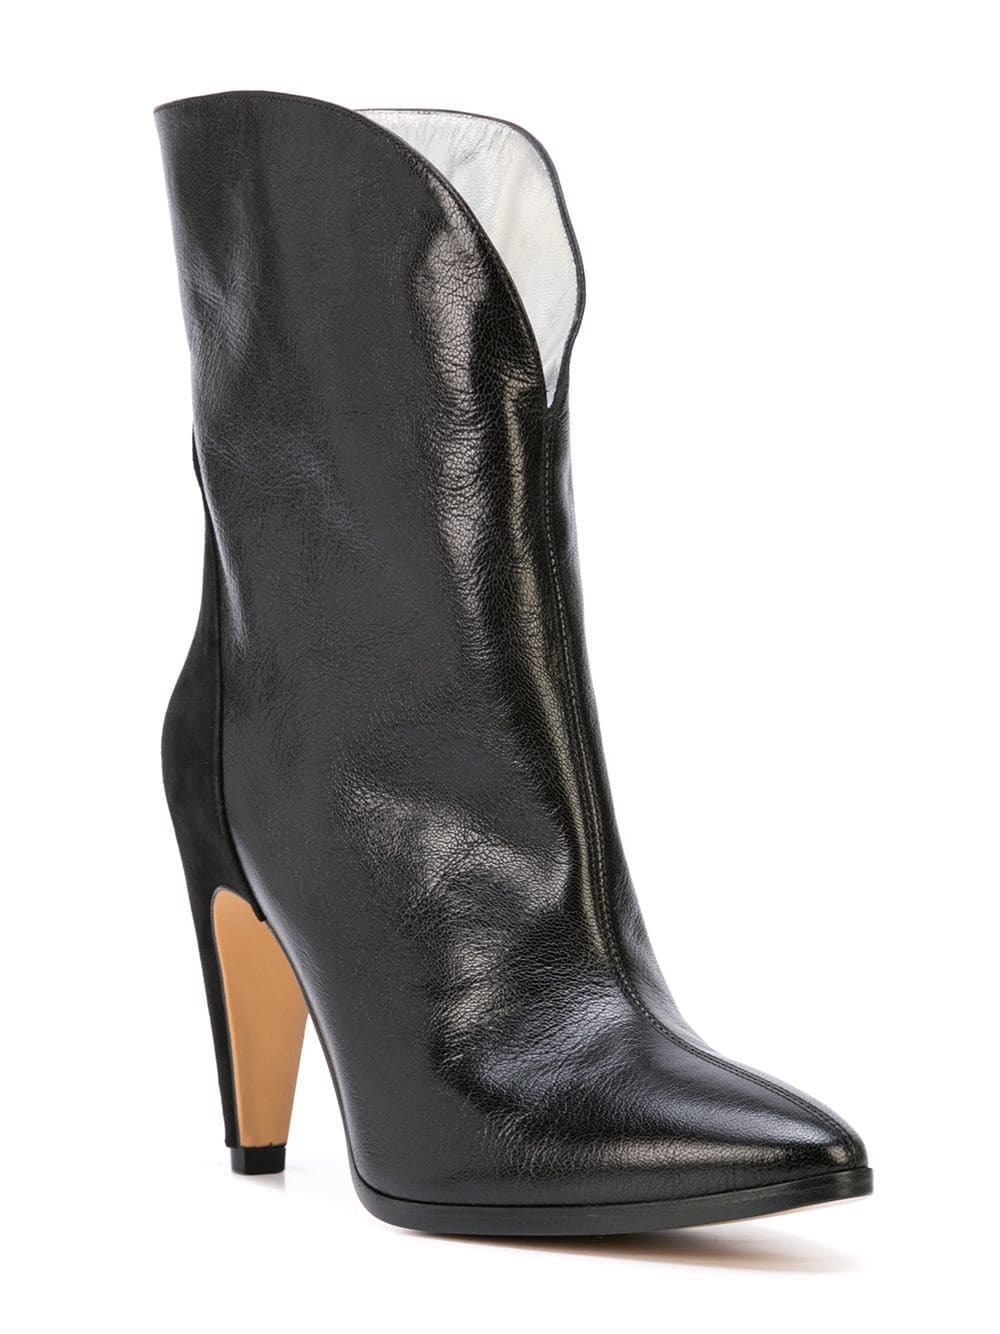 Givenchy Mid Heel Ankle Boots, $1,250 